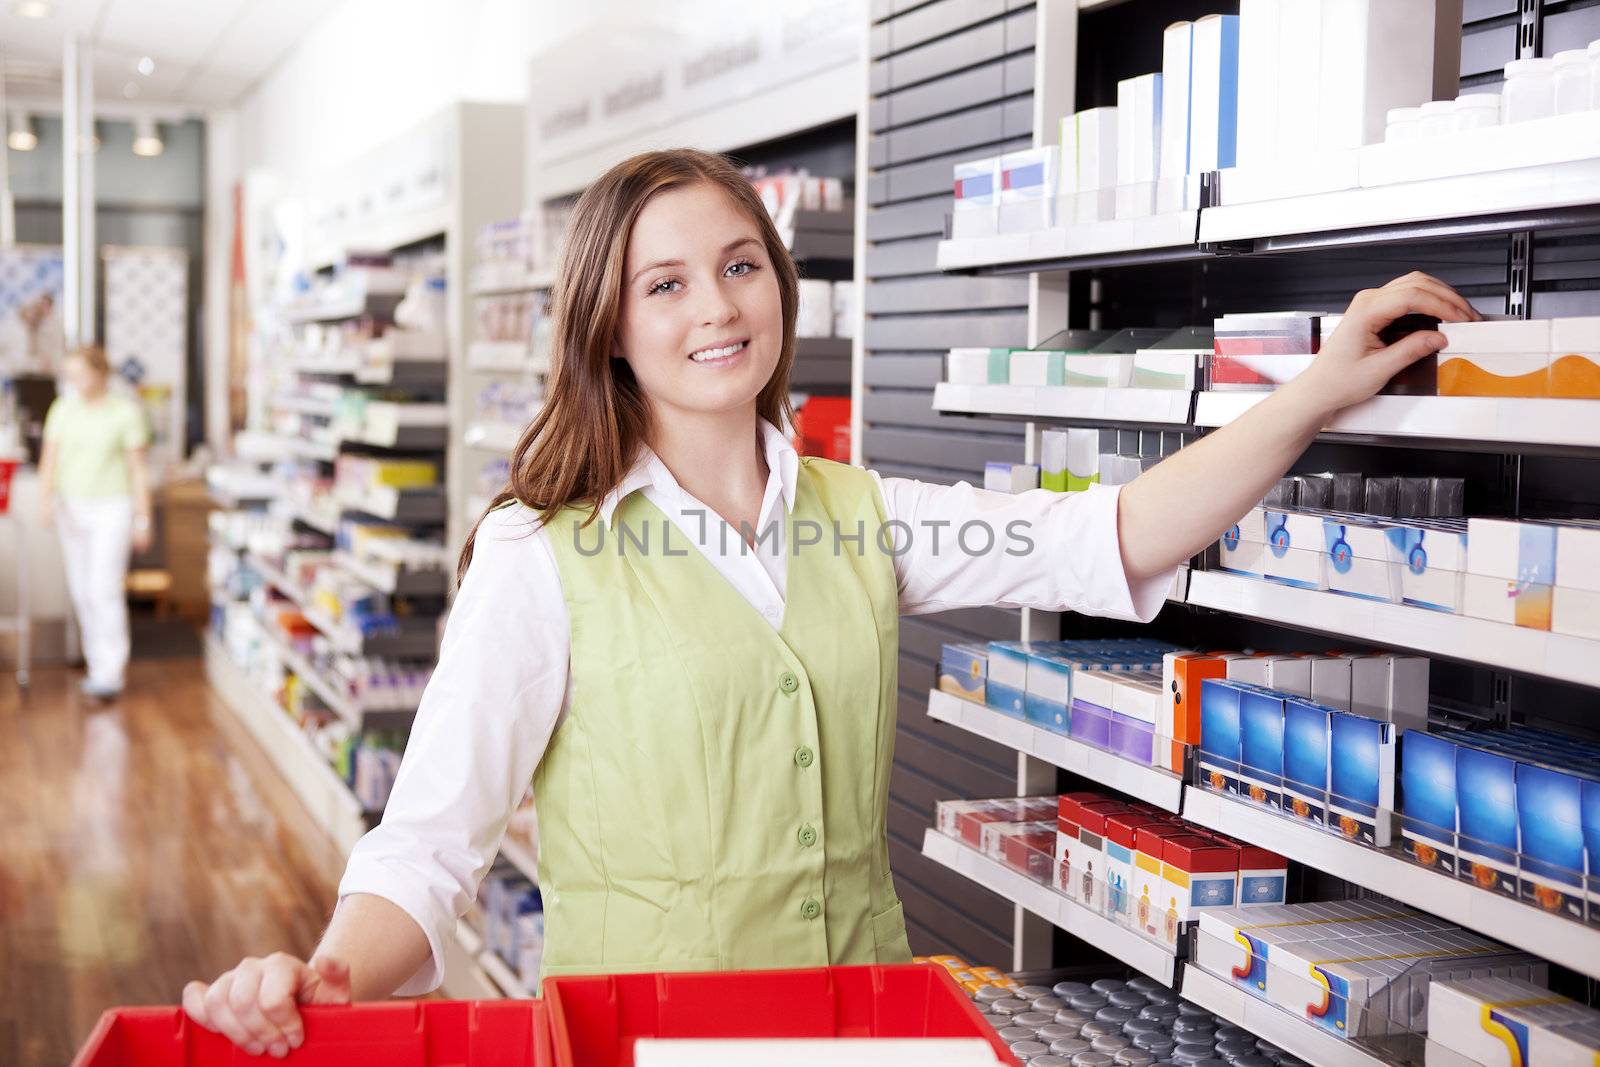 Pharmacist Looking For Medicine by leaf